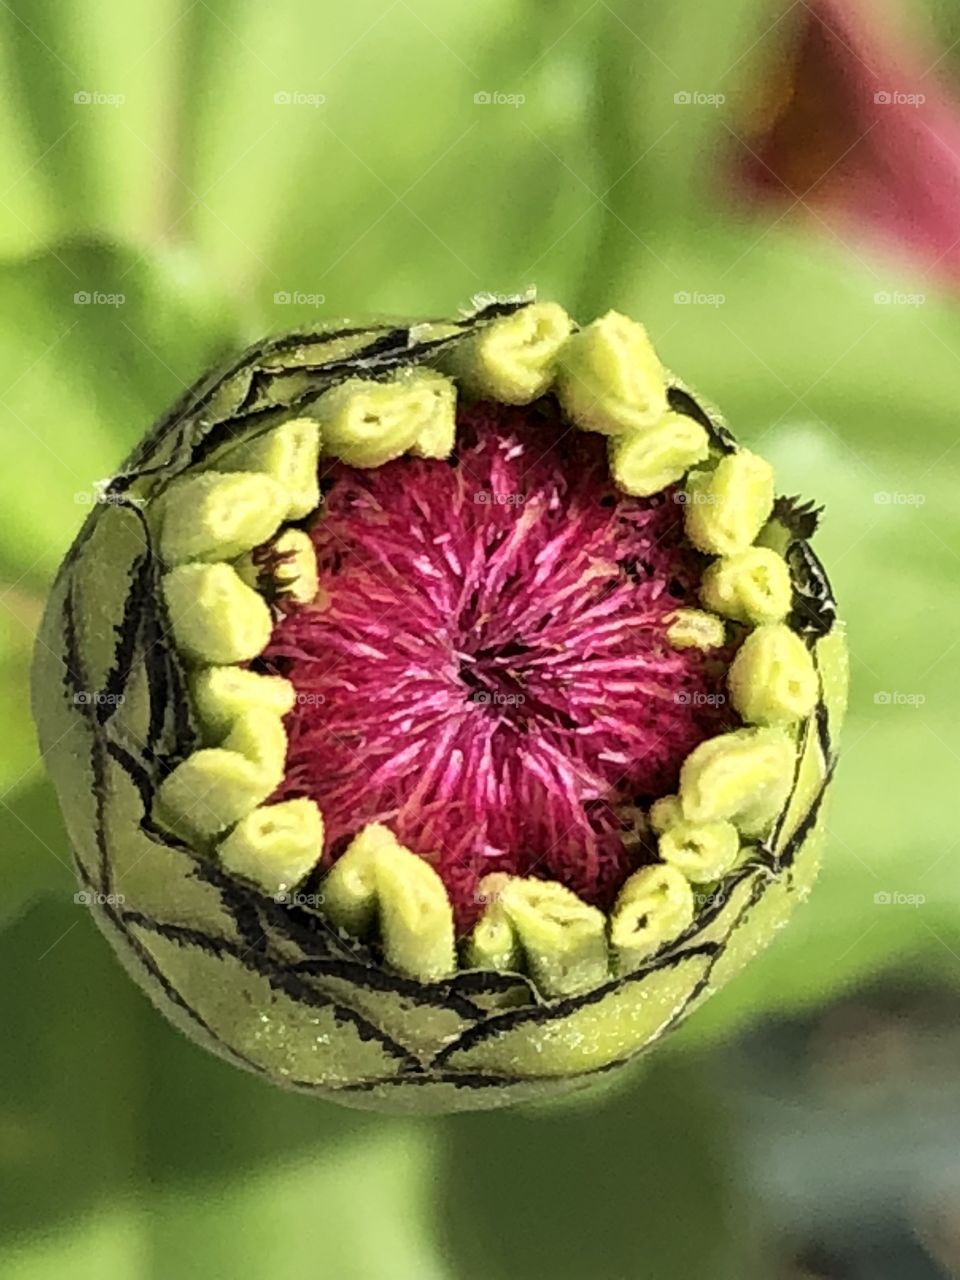 An unopened flower bud shows it’s fractal designs and poises on the brink of it’s bloom-